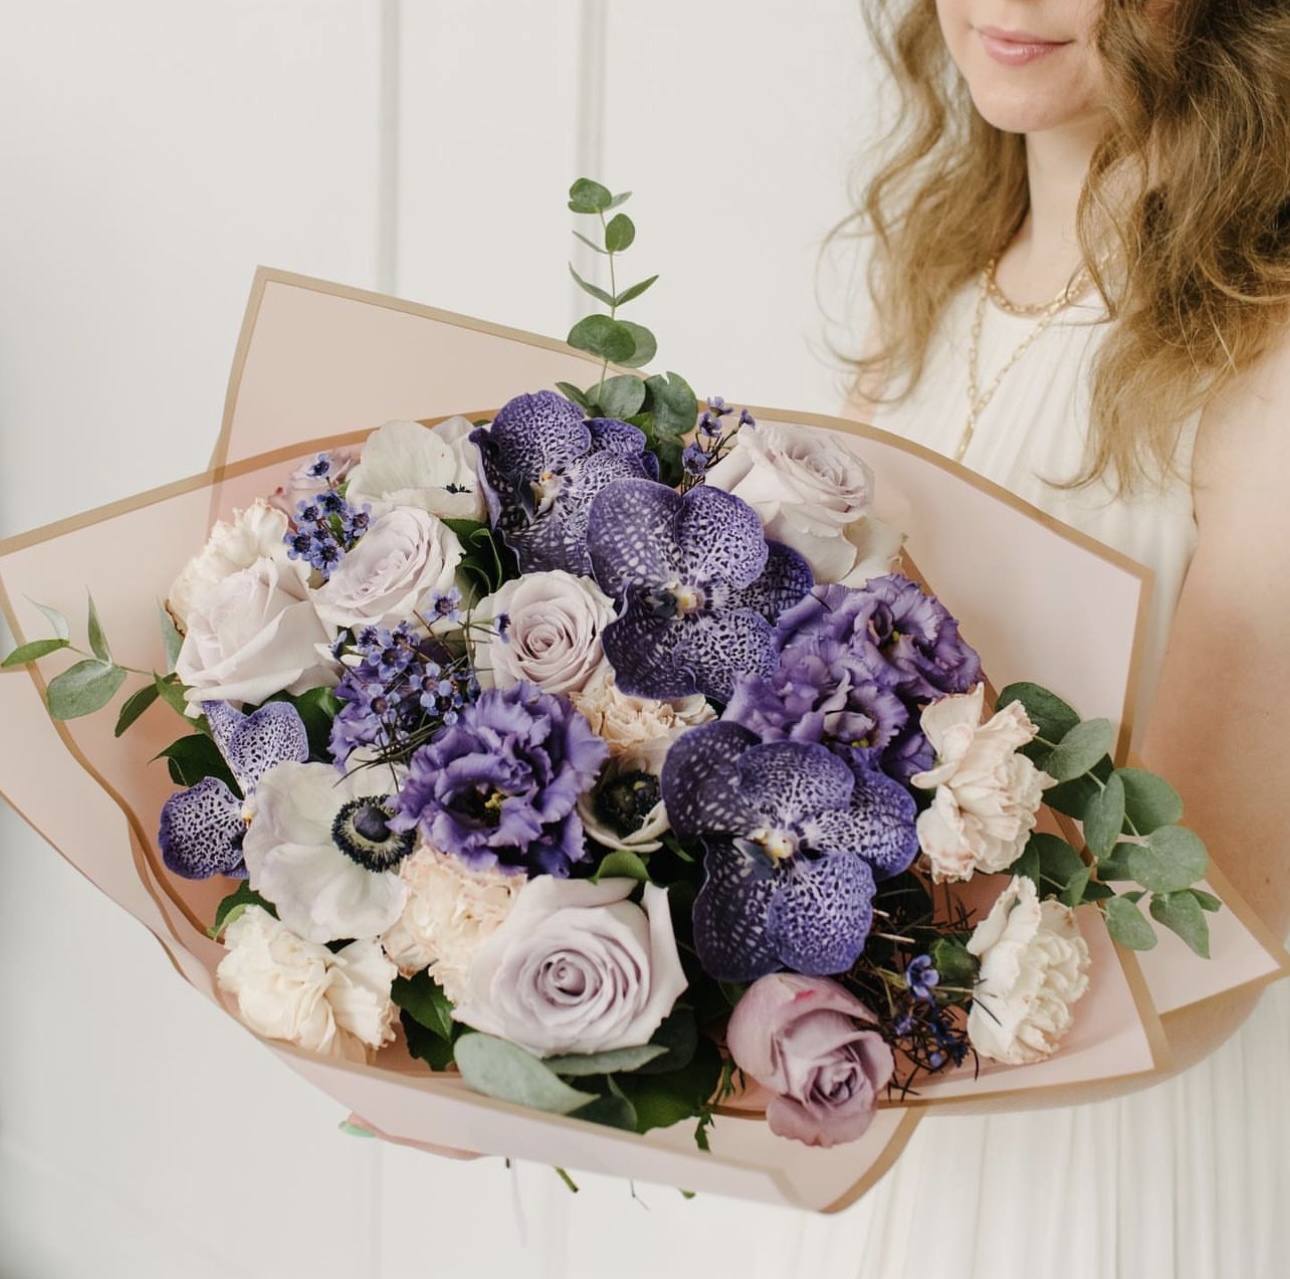 A woman holding a bouquet of purple and white flowers from Blossom Moments